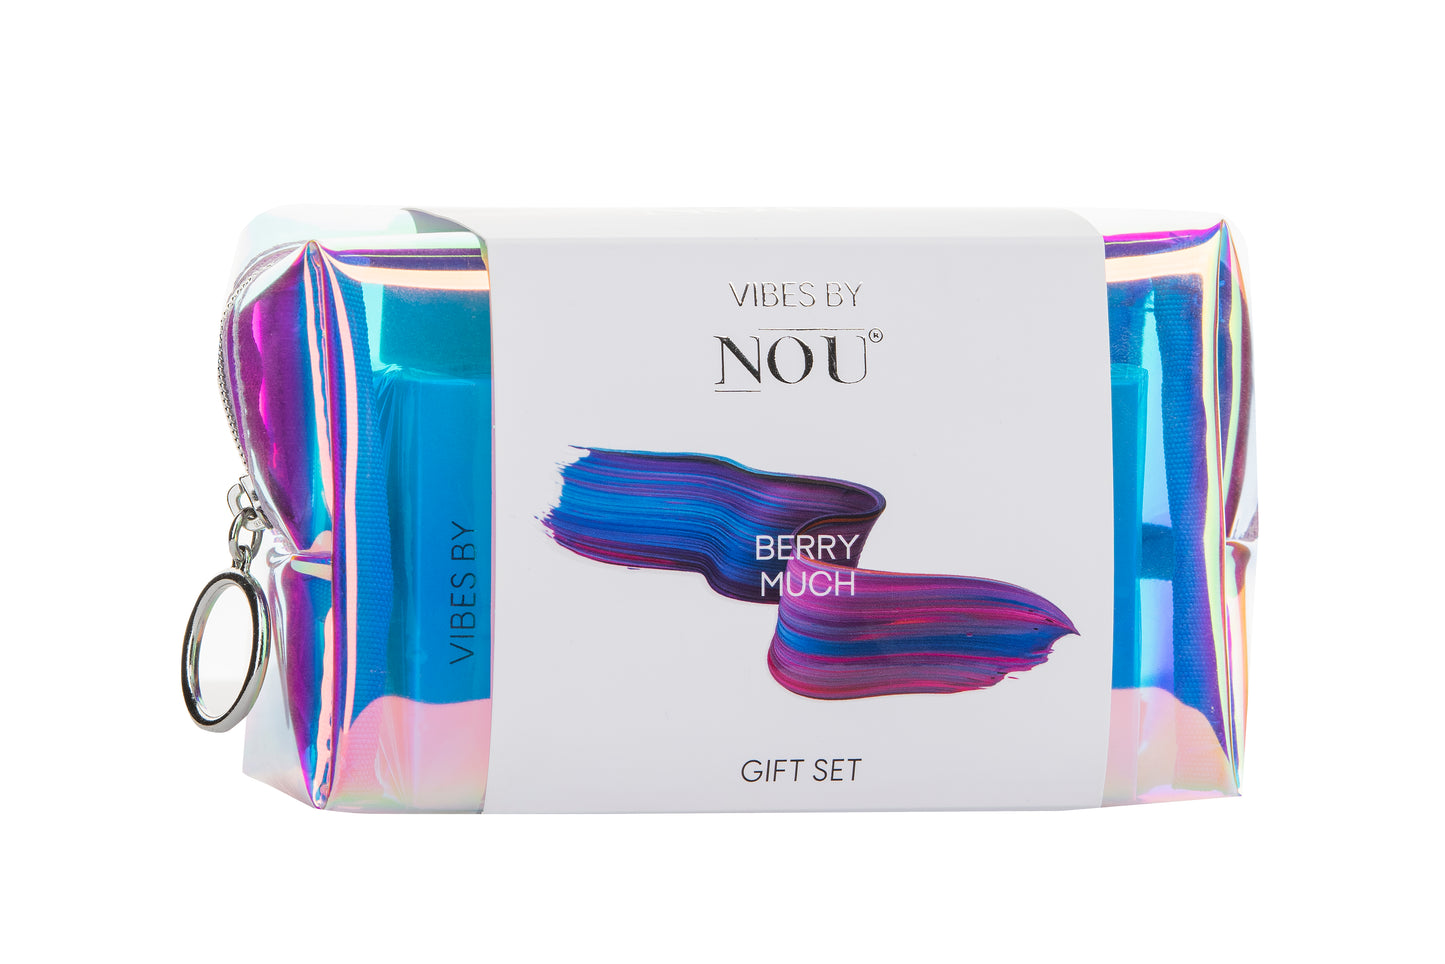 NOU VIBES BY NOU BERRY MUCH GIFT SET - EASTERN SCENT